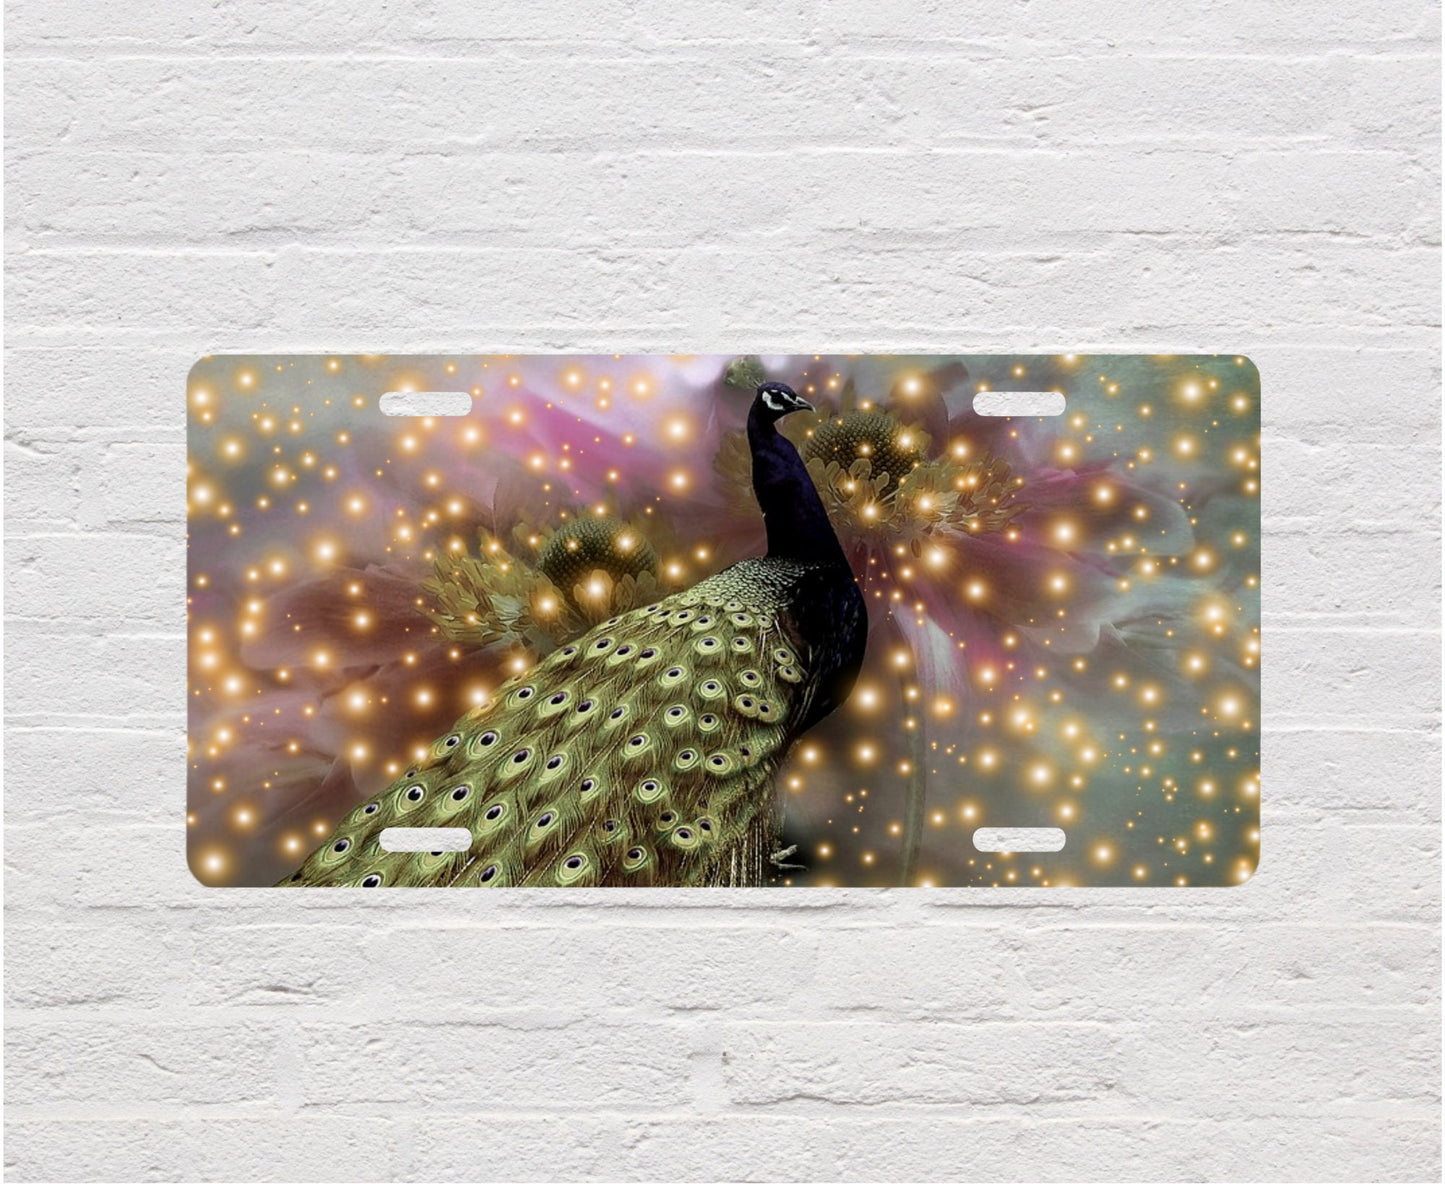 Peacock Sparkles Vanity Decorative Front License Plate - Cute Car License Plate Made in the USA - Aluminum Metal Plate - Premium Car Plate